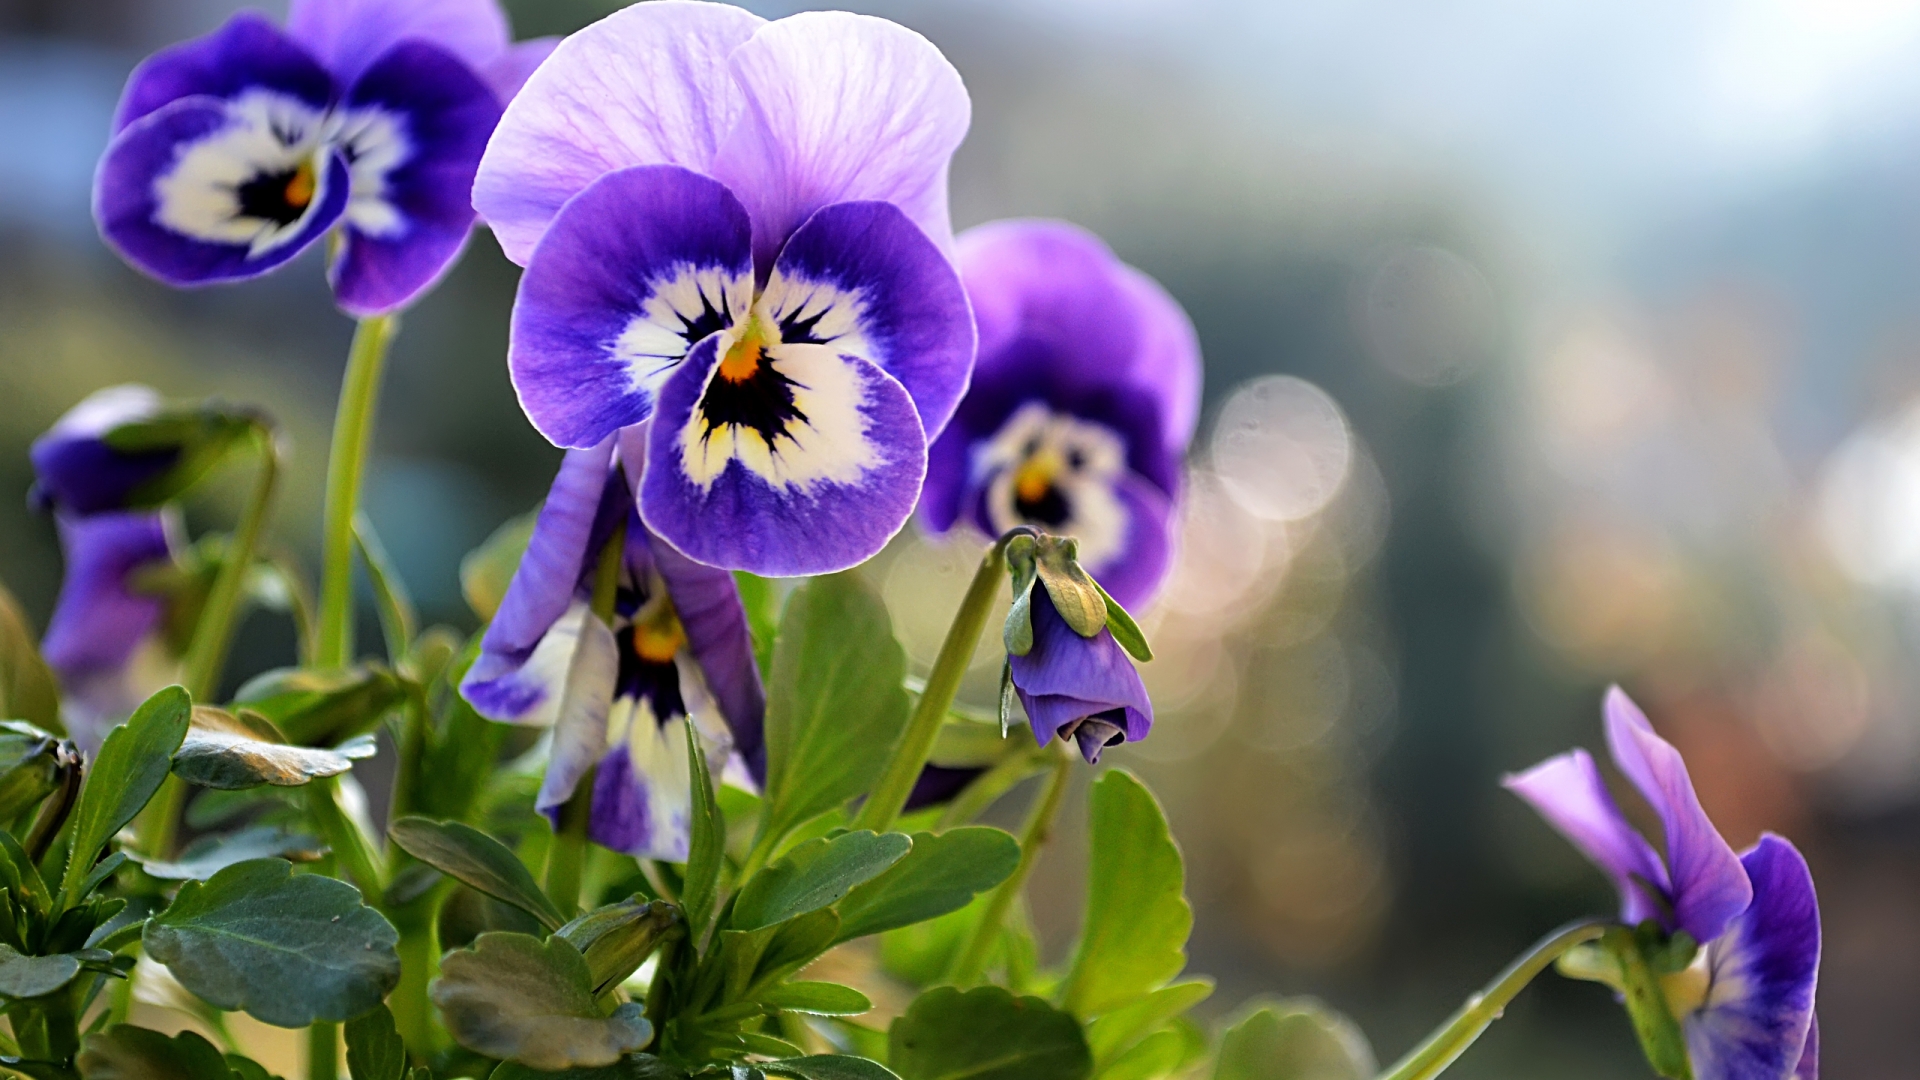 Beautiful Little Pansies for 1920 x 1080 HDTV 1080p resolution